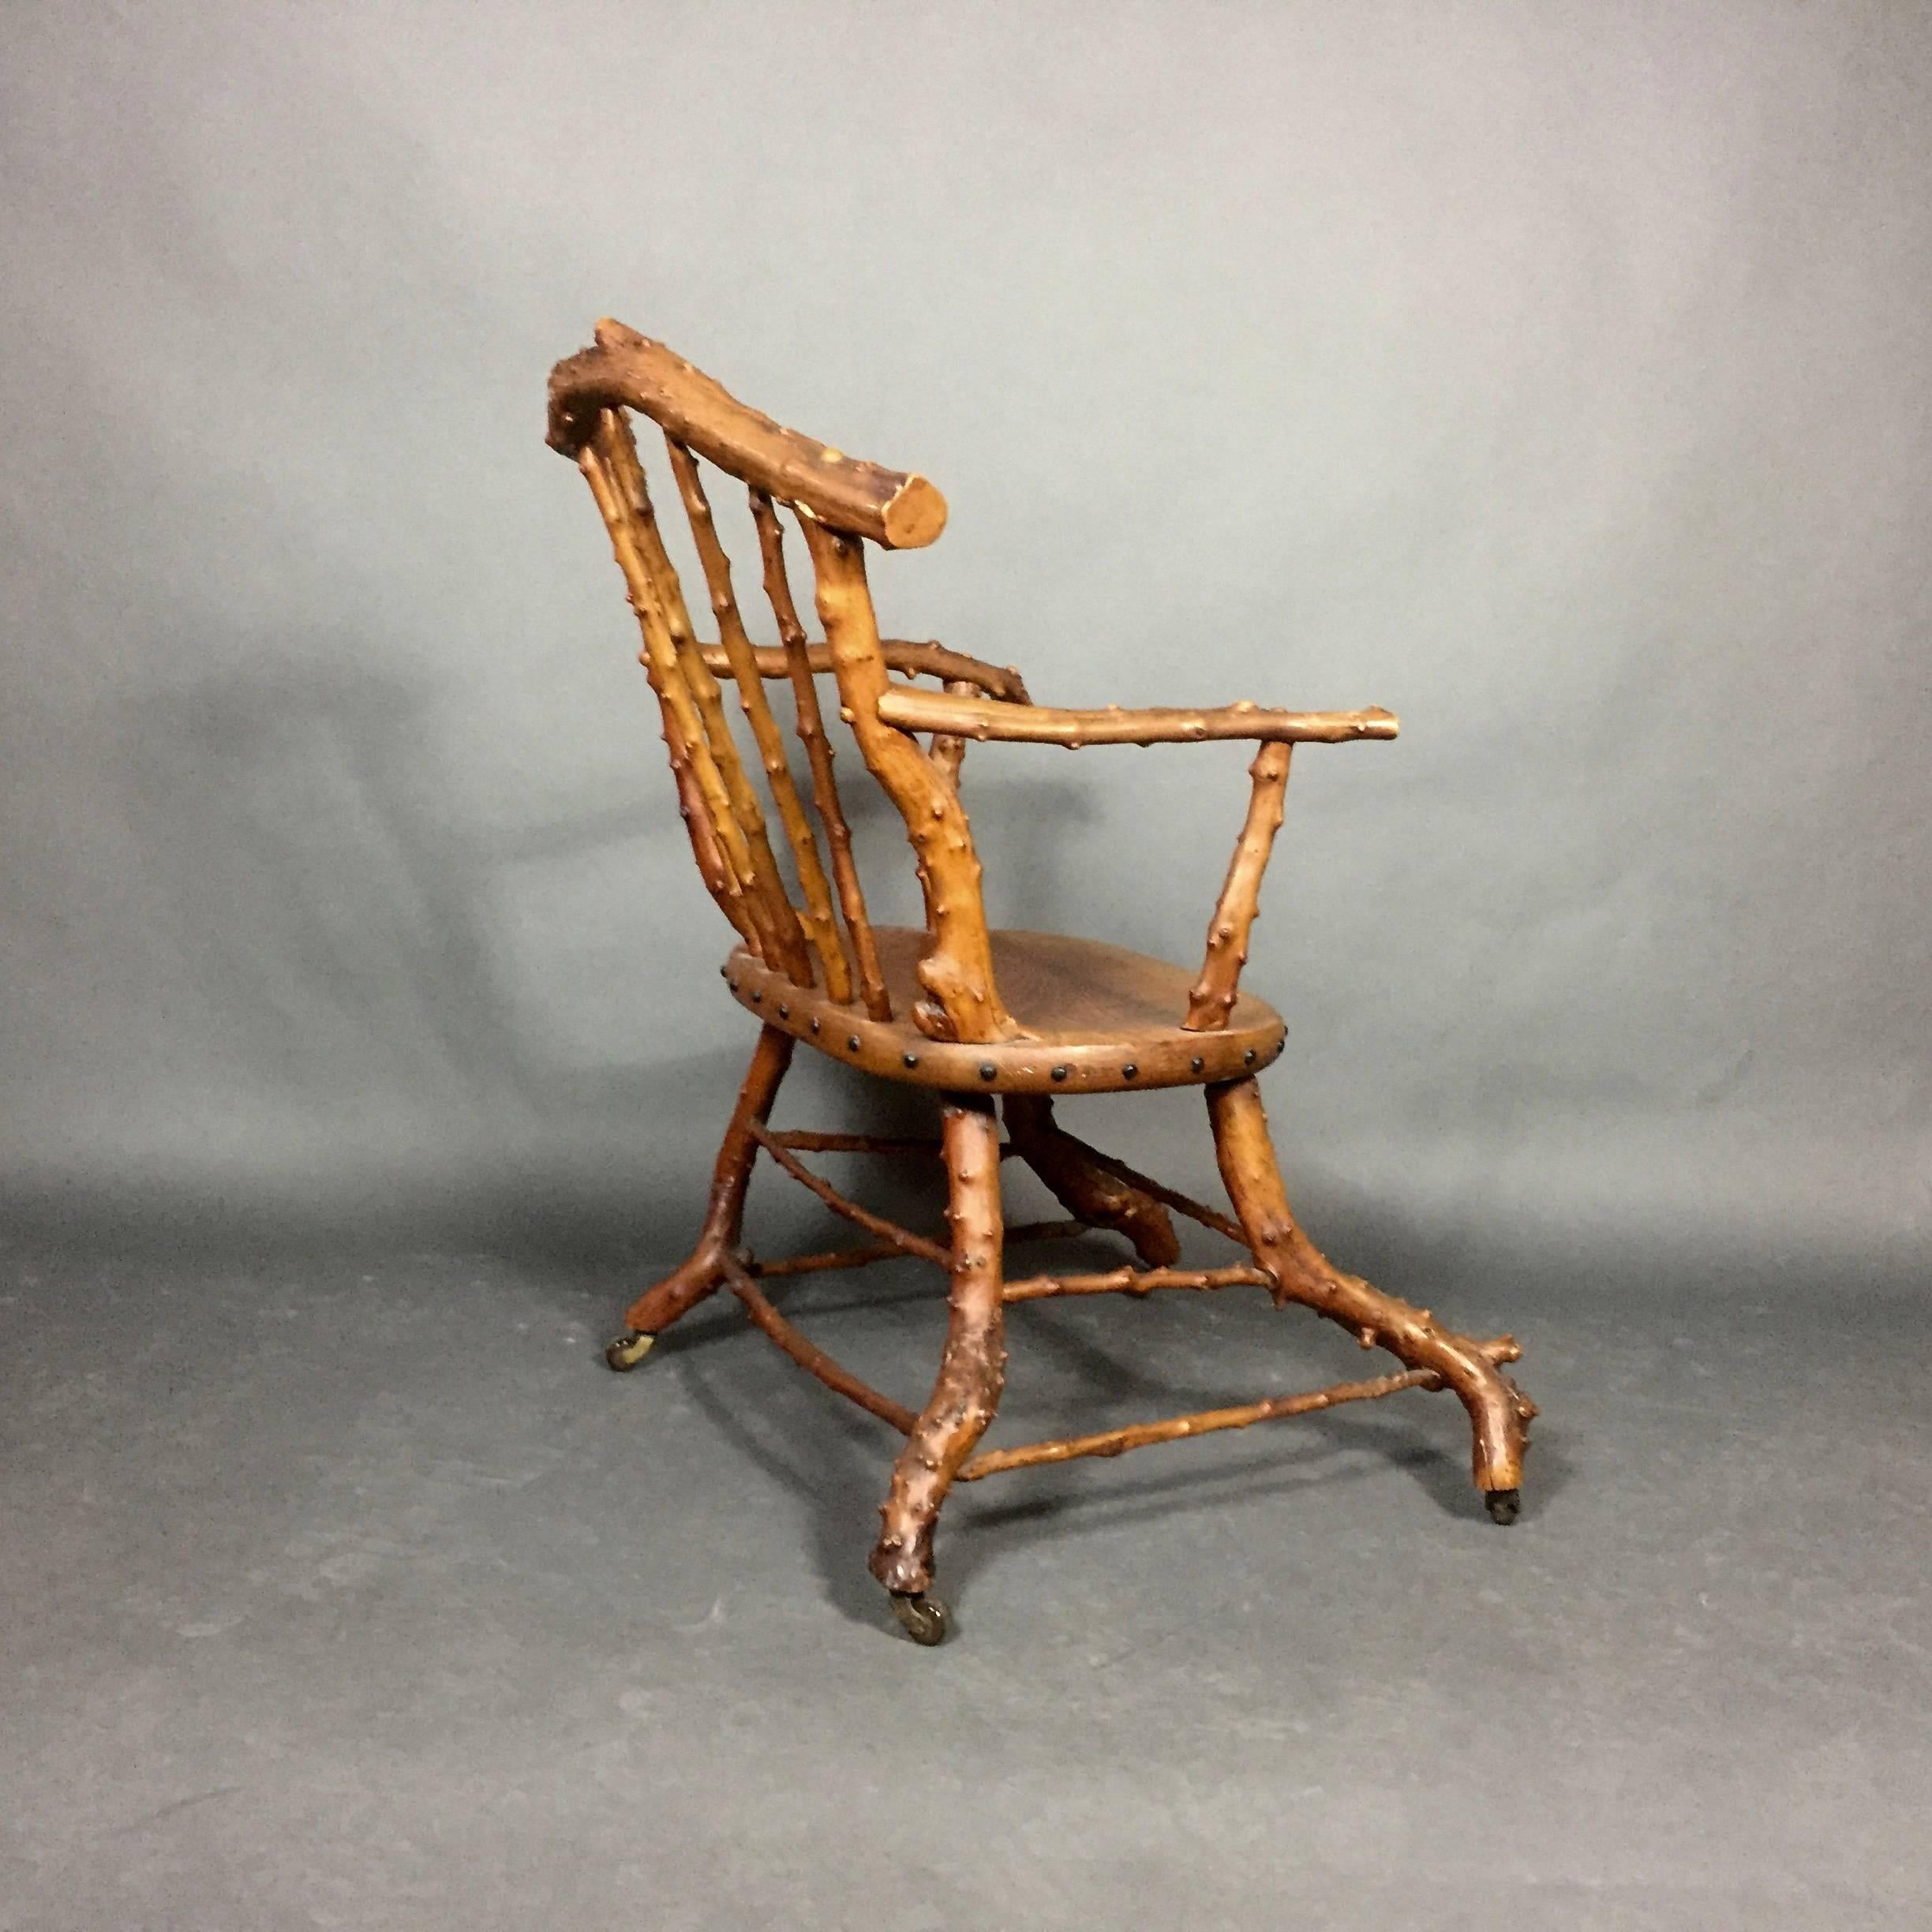 Exceptional 19th Century English Arts & Crafts Yew Wood Armchair 2